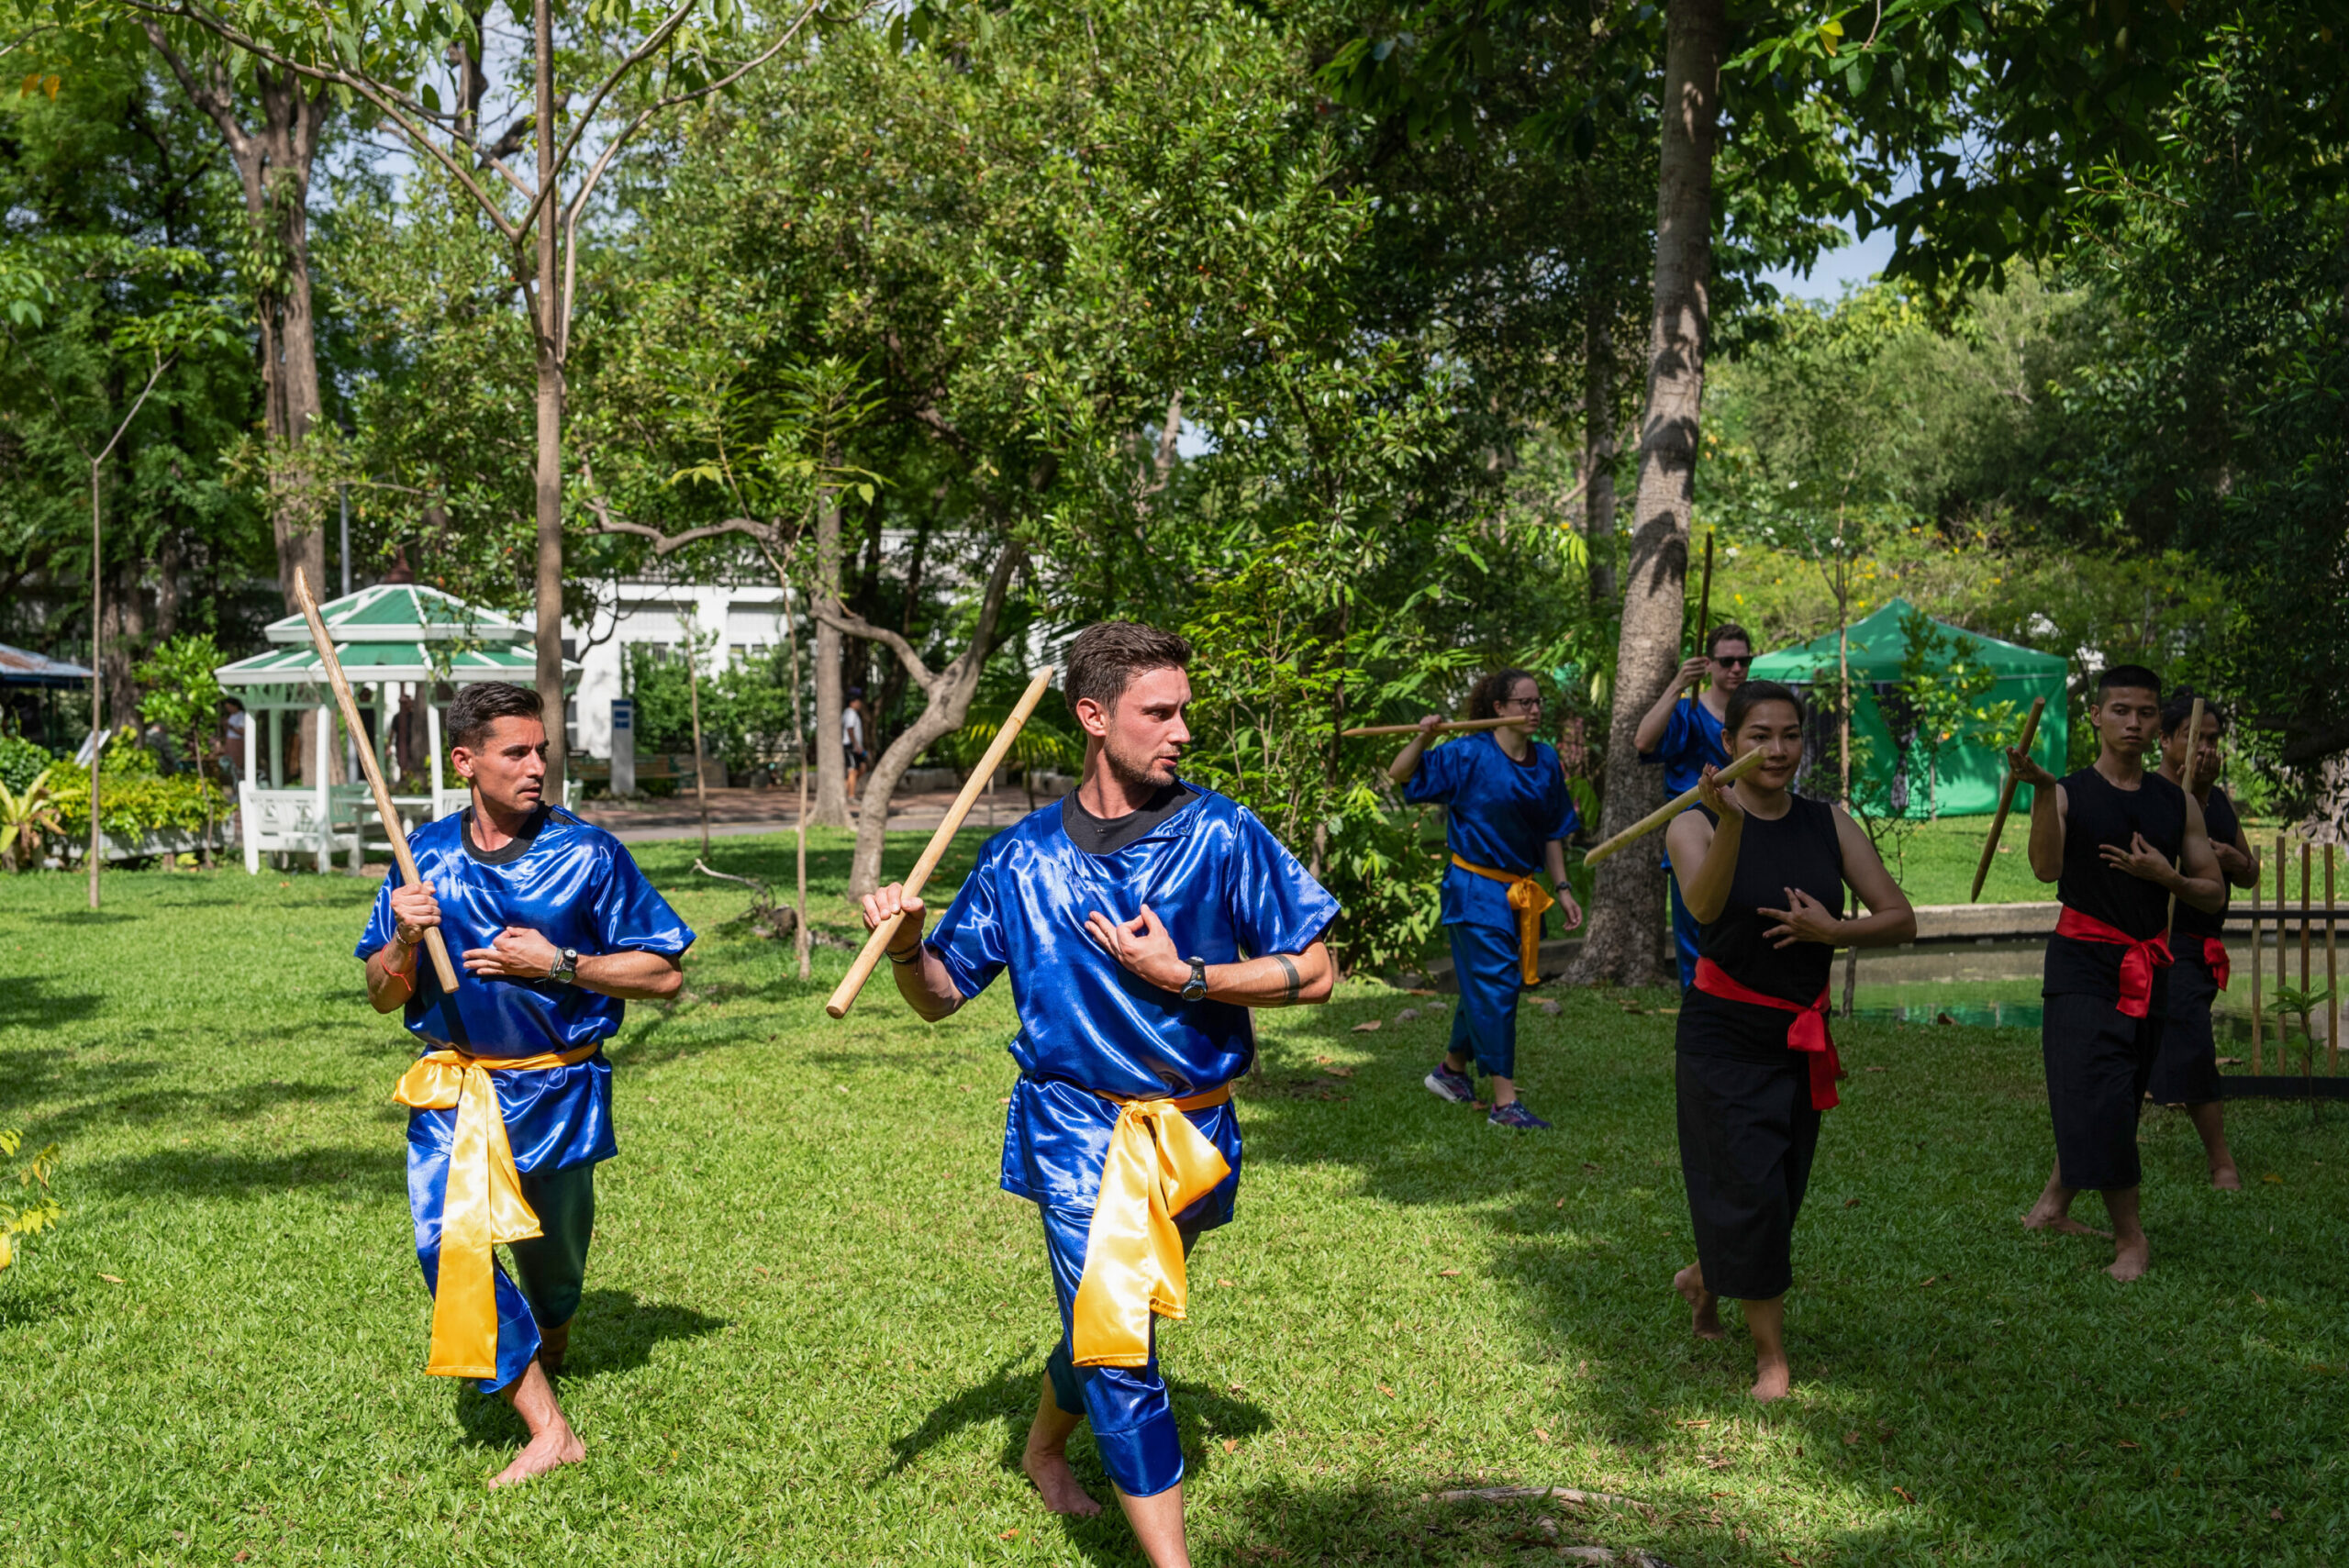 Ian Todd and Joe Moskowitz take on a challenge in Thailand (Photo Credit: Sonja Flemming/CBS)